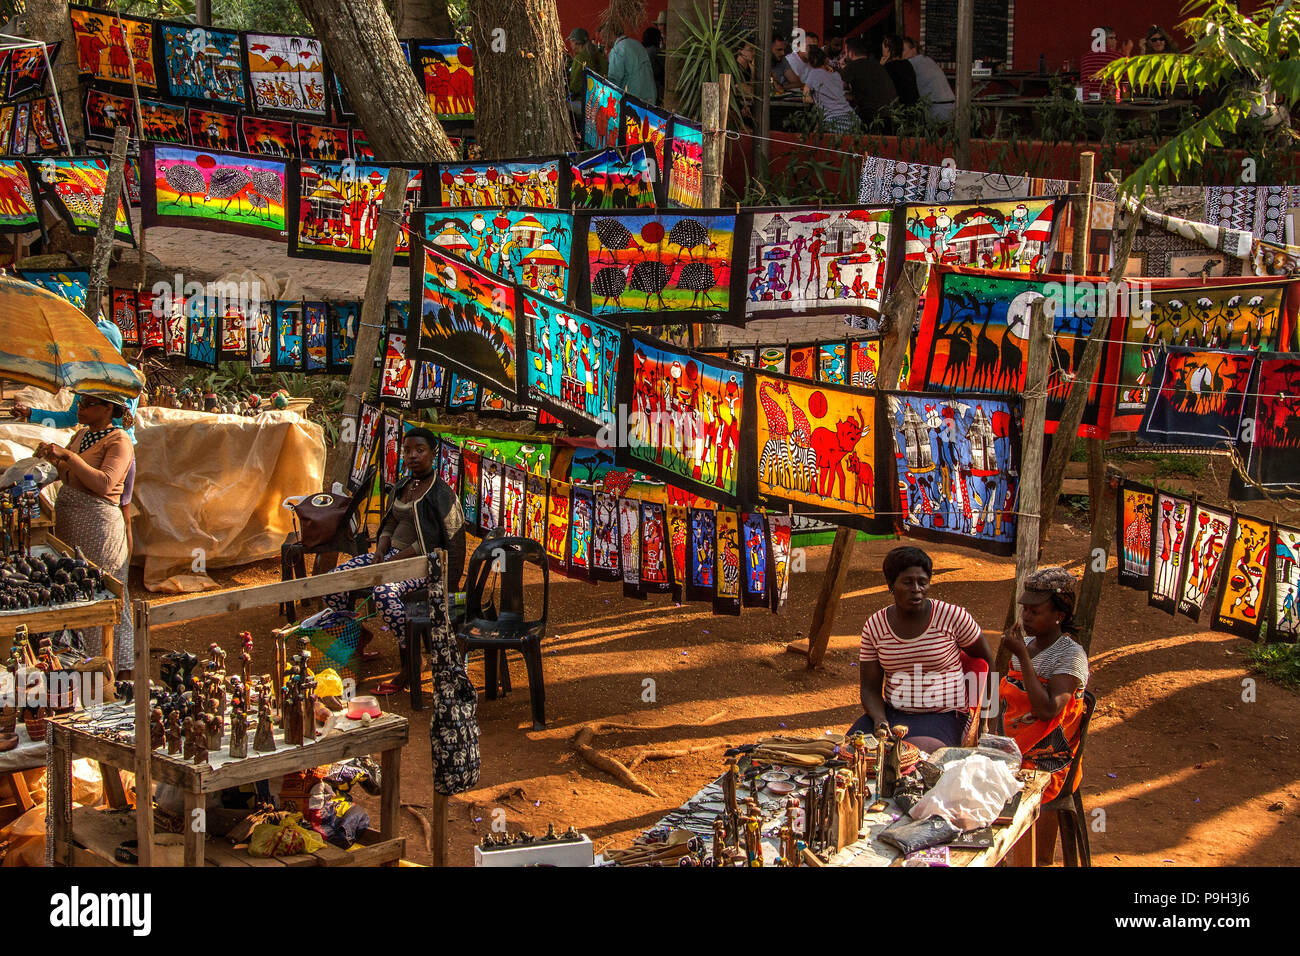 Ezulwini Craft market in Swaziland, towards the end of a busy day, showing colourful batik fabric painting and a variety of other products for sale. Stock Photo